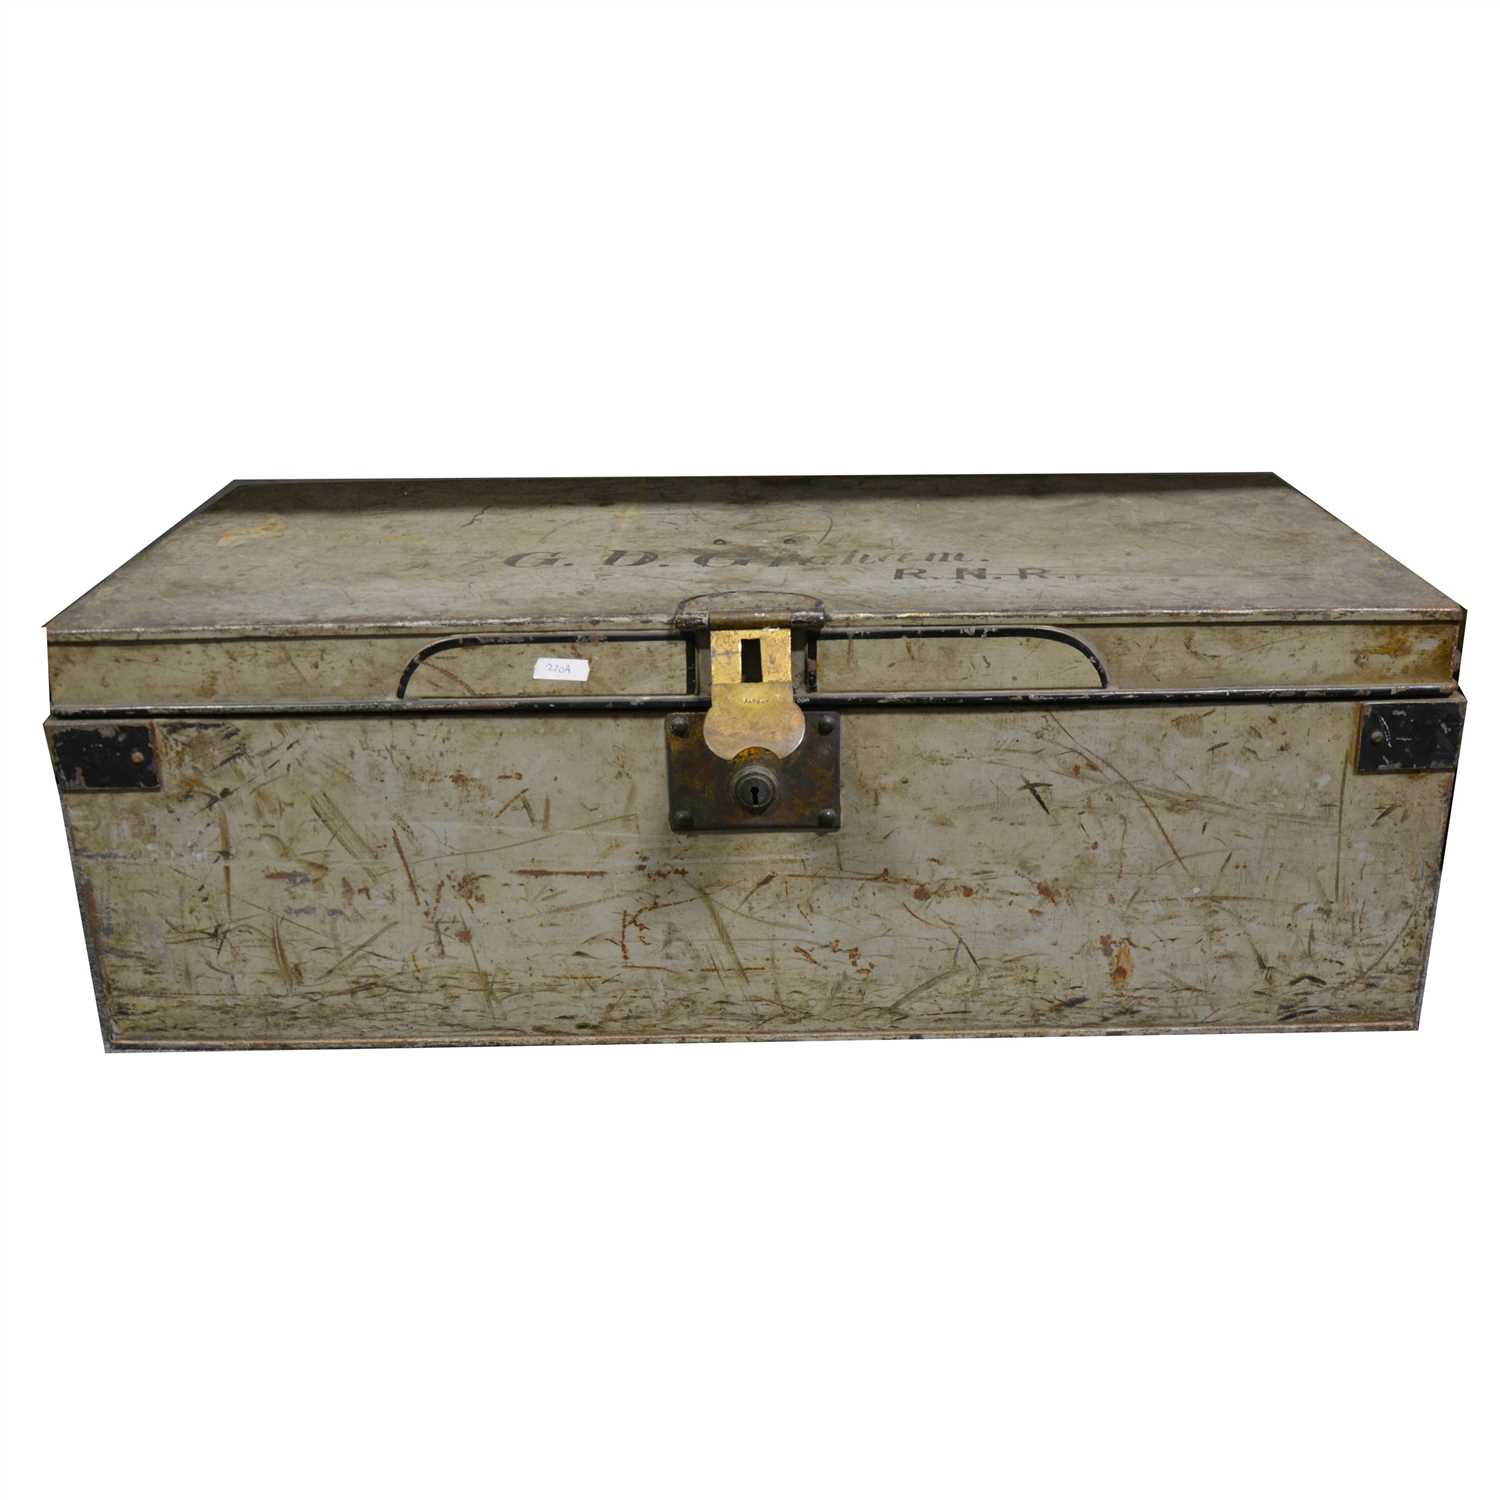 Lot 151 - Tin trunk by Williamson & Son and Admiralty coats and ephemera for Assistant Paymaster Gordon D Graham RNR